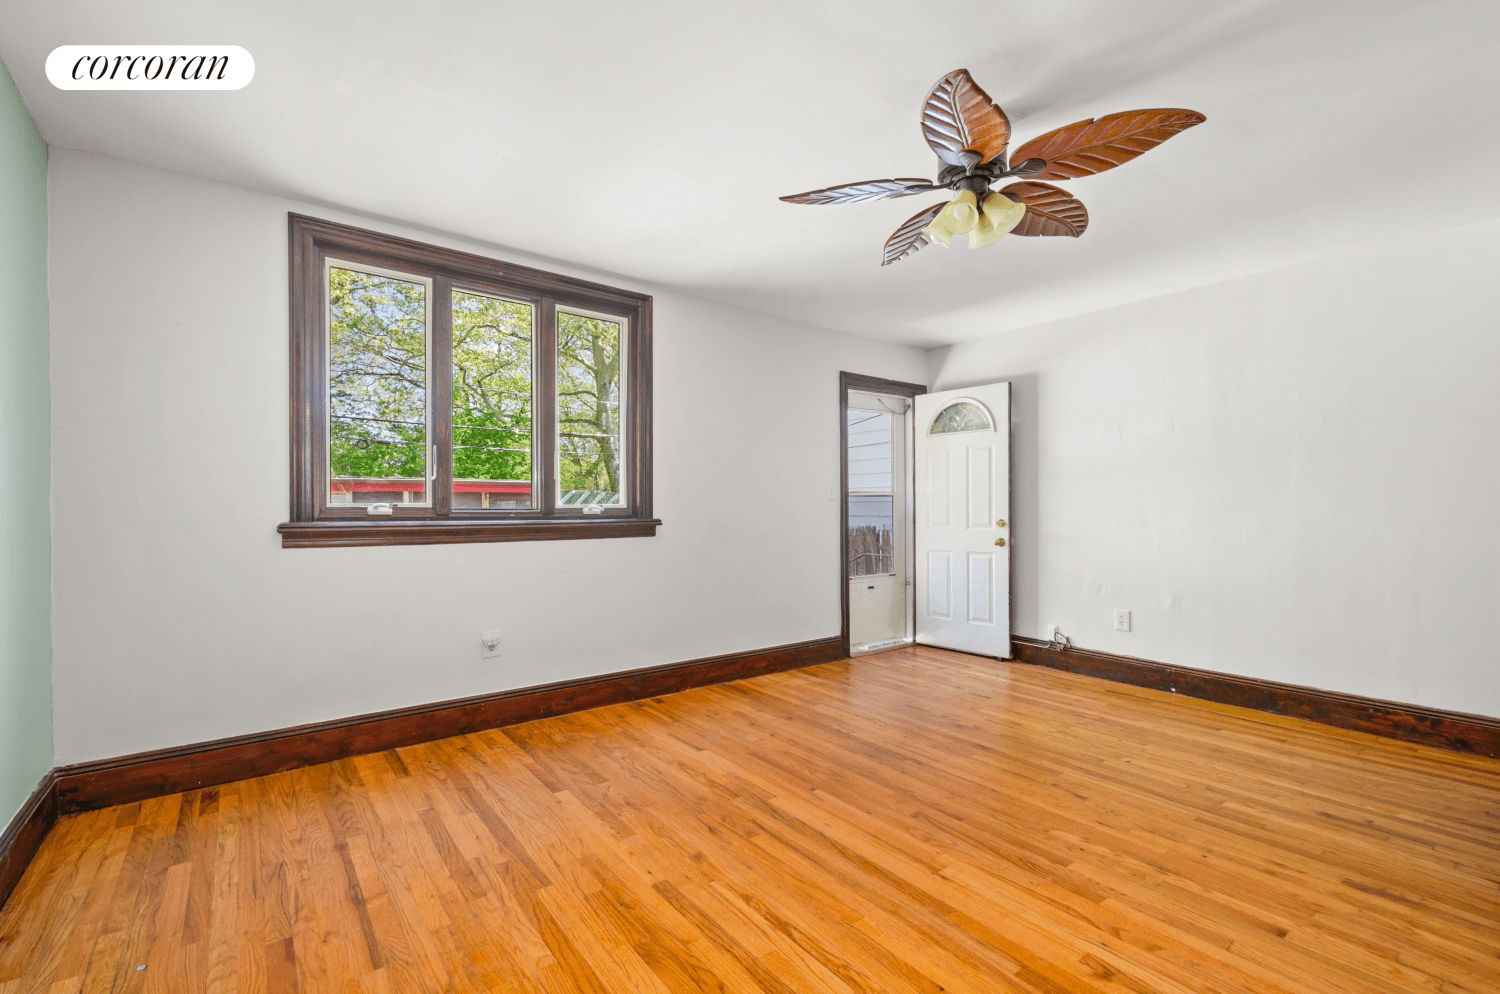 Nestled on one of Windsor Terrace's prettiest tree lined streets, and situated within a charming townhouse, your new home offers a harmonious blend of modern convenience and classic Brooklyn charm.